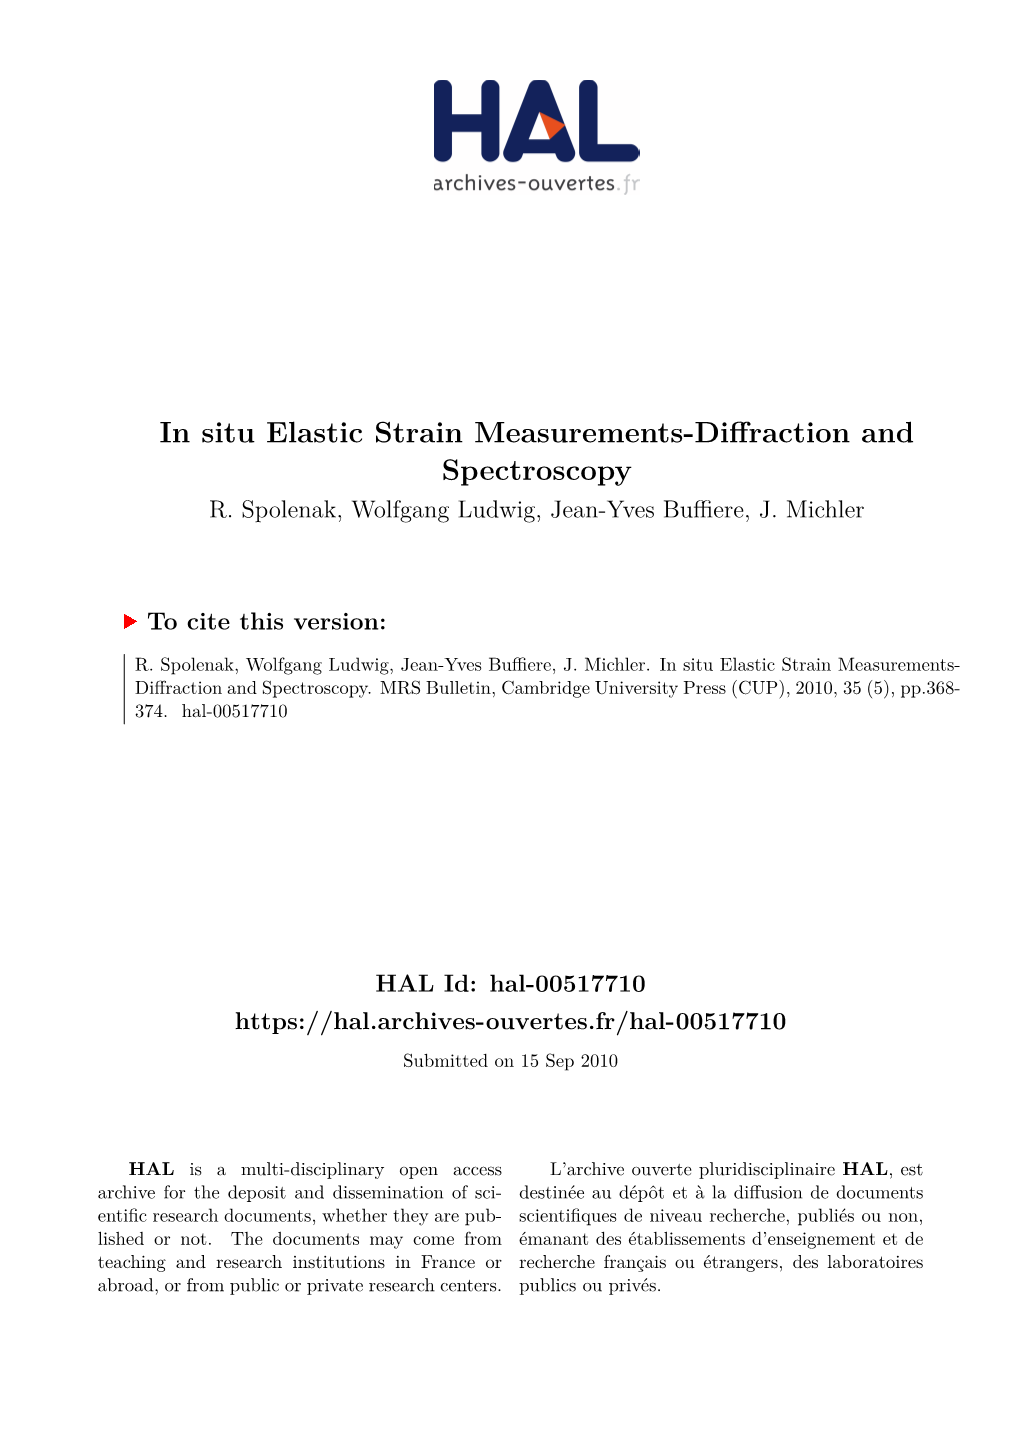 In Situ Elastic Strain Measurements-Diffraction and Spectroscopy R